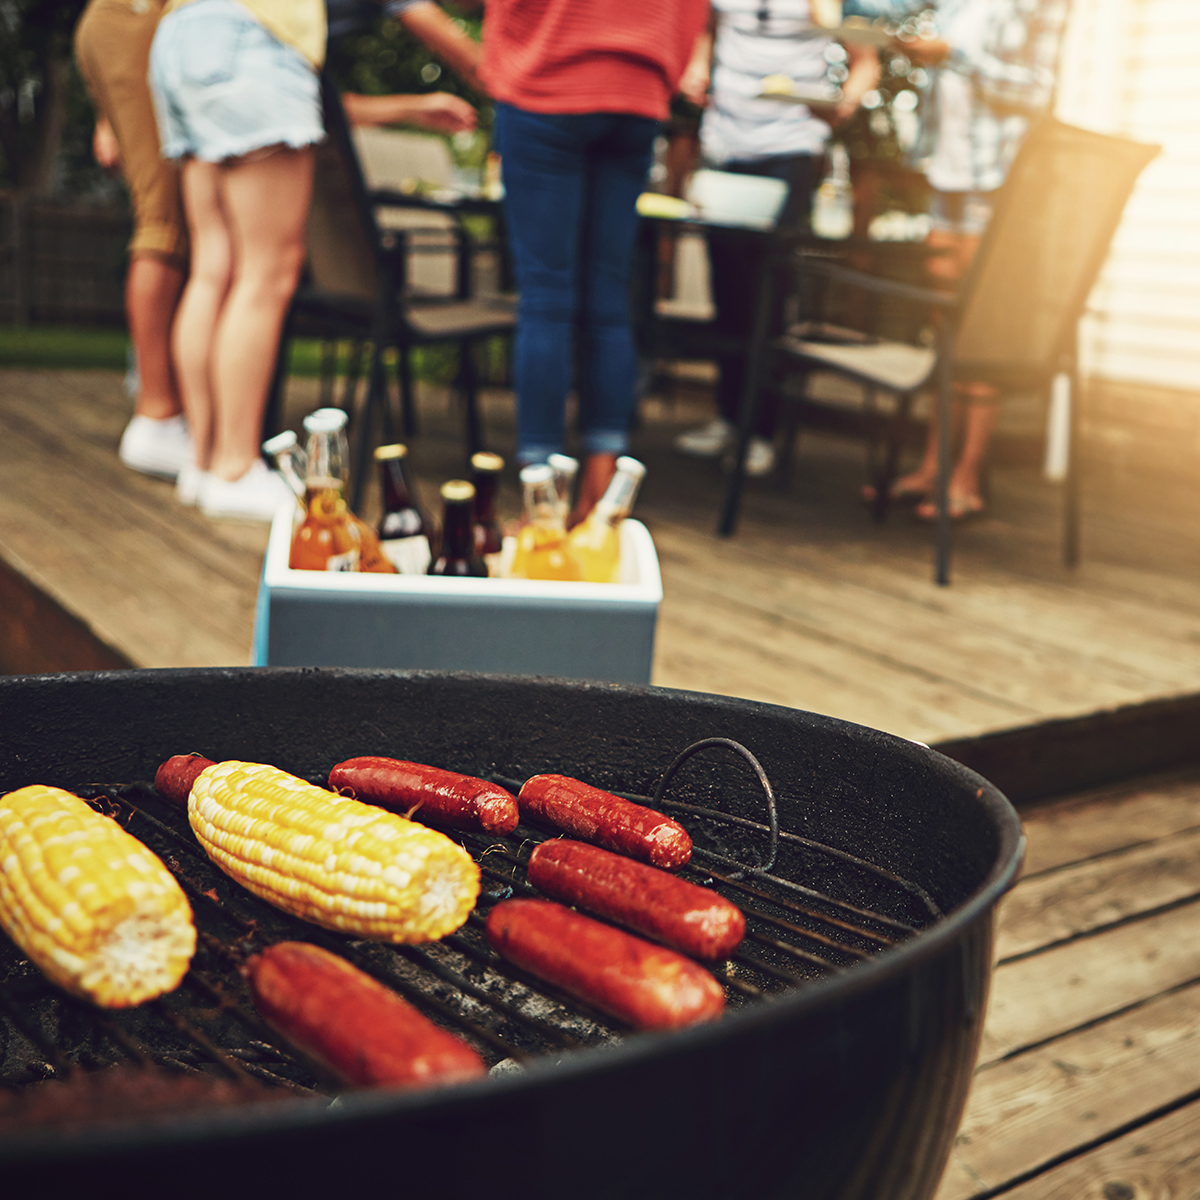 Be sure to take heed of outdoor grilling safety tips this summer.